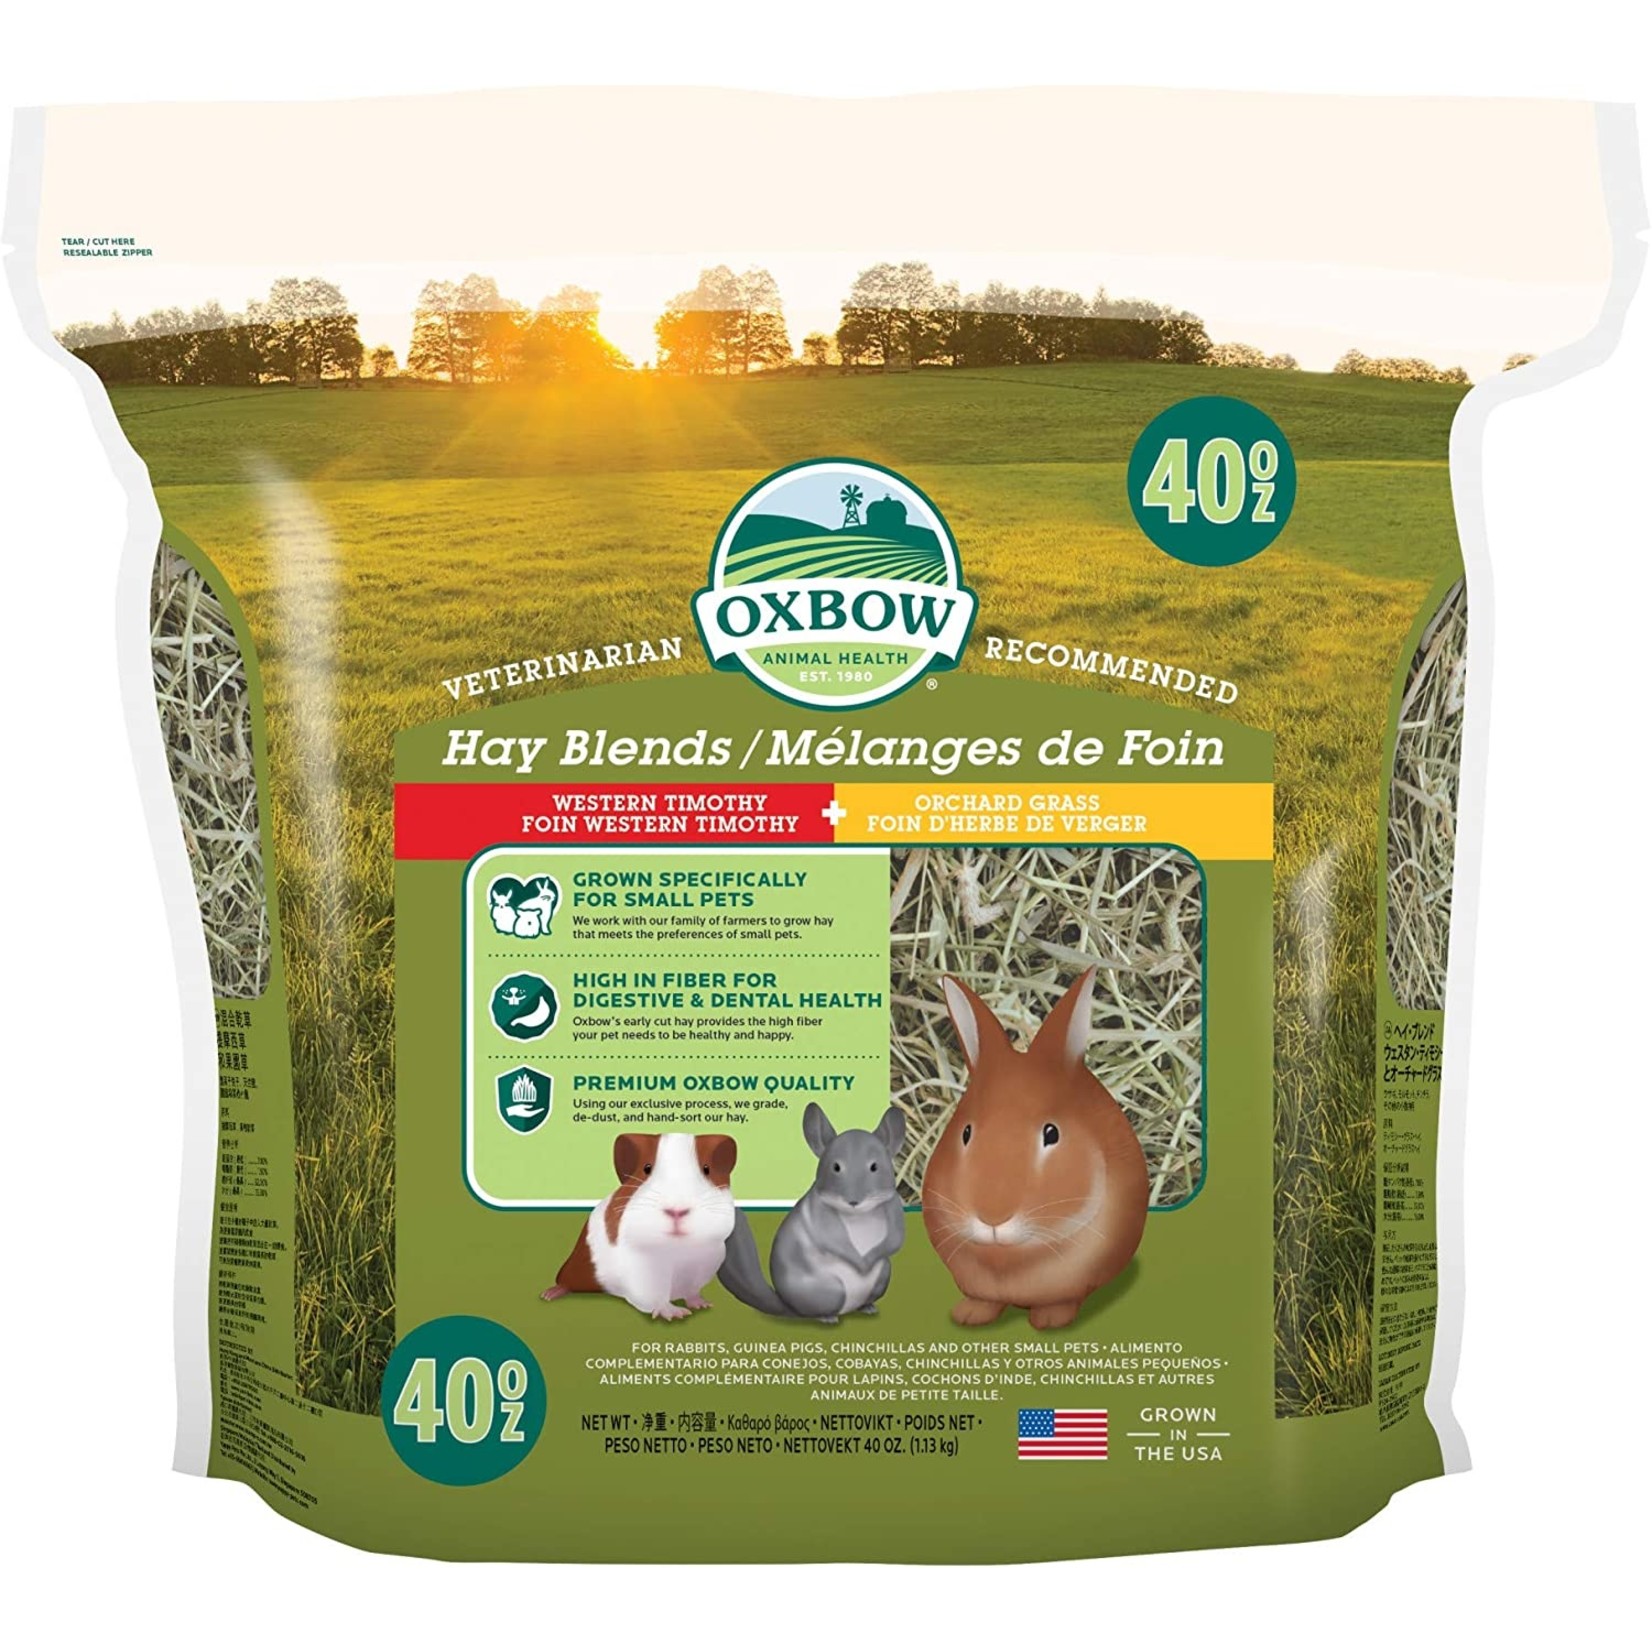 OXBOW Oxbow Hay Blends Western Timothy and Orchard, 40oz